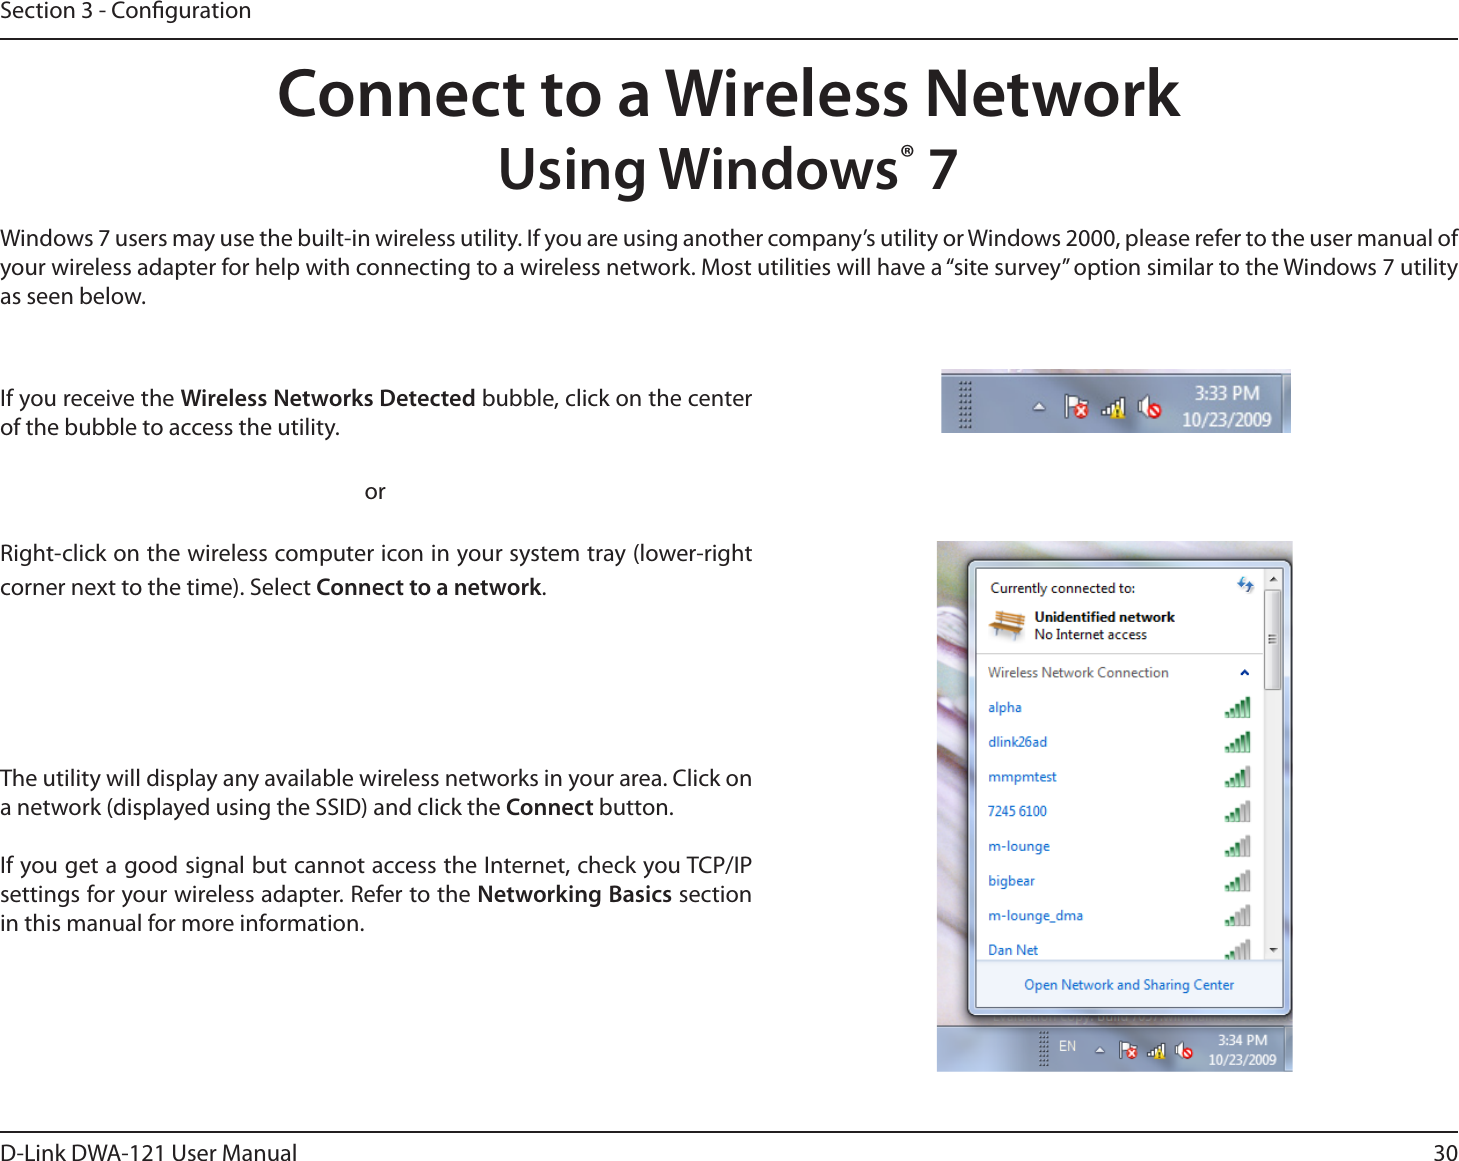 30D-Link DWA-121 User ManualSection 3 - CongurationConnect to a Wireless NetworkUsing Windows® 7Windows 7 users may use the built-in wireless utility. If you are using another company’s utility or Windows 2000, please refer to the user manual of your wireless adapter for help with connecting to a wireless network. Most utilities will have a “site survey” option similar to the Windows 7 utility as seen below.Right-click on the wireless computer icon in your system tray (lower-right corner next to the time). Select Connect to a network.If you receive the Wireless Networks Detected bubble, click on the center of the bubble to access the utility.     orThe utility will display any available wireless networks in your area. Click on a network (displayed using the SSID) and click the Connect button.If you get a good signal but cannot access the Internet, check you TCP/IP settings for your wireless adapter. Refer to the Networking Basics section in this manual for more information.